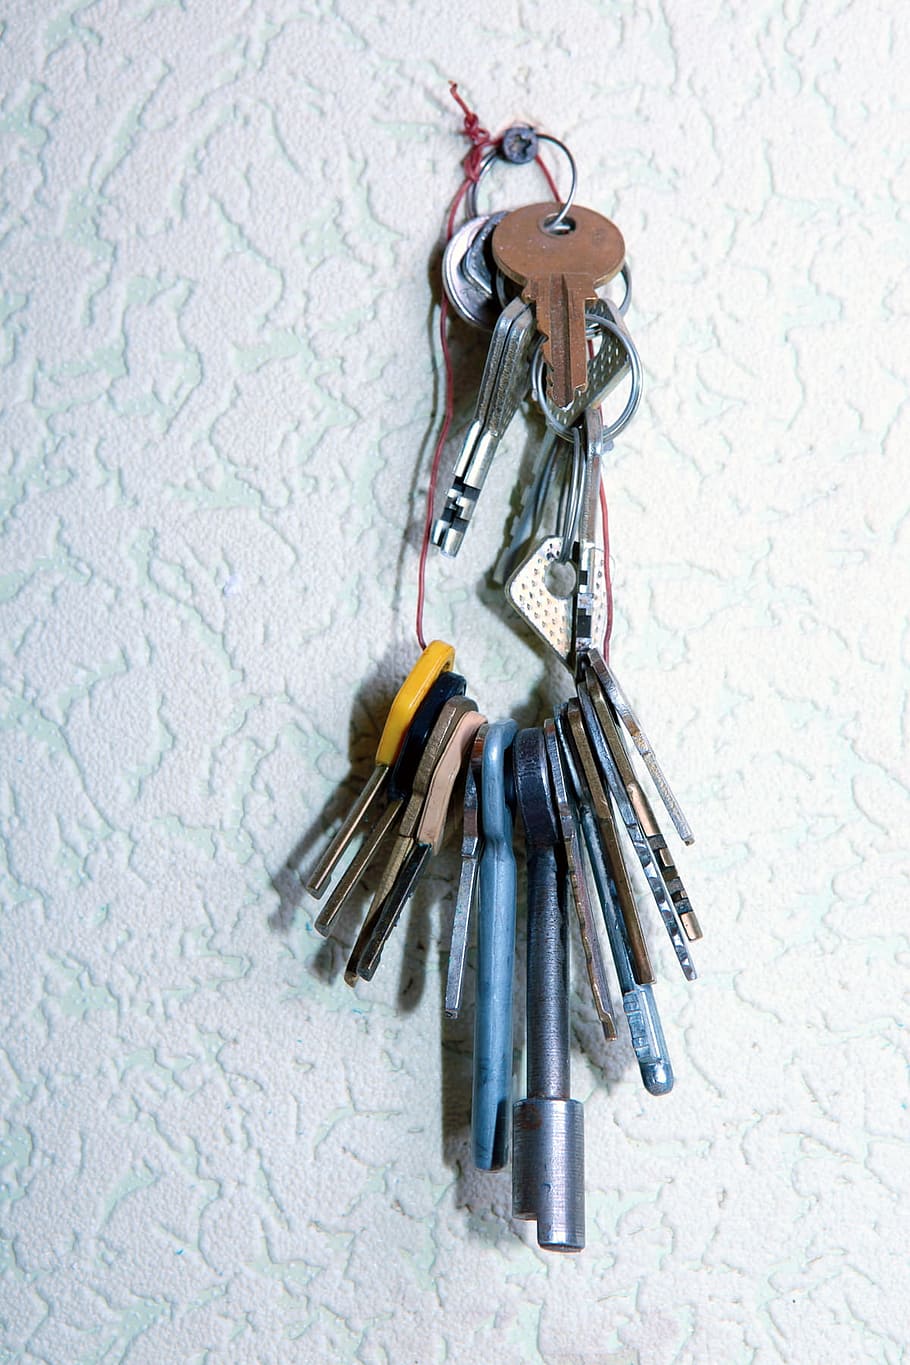 keys, key, metal, high angle view, still life, close-up, outdoors, directly above, protection, key ring